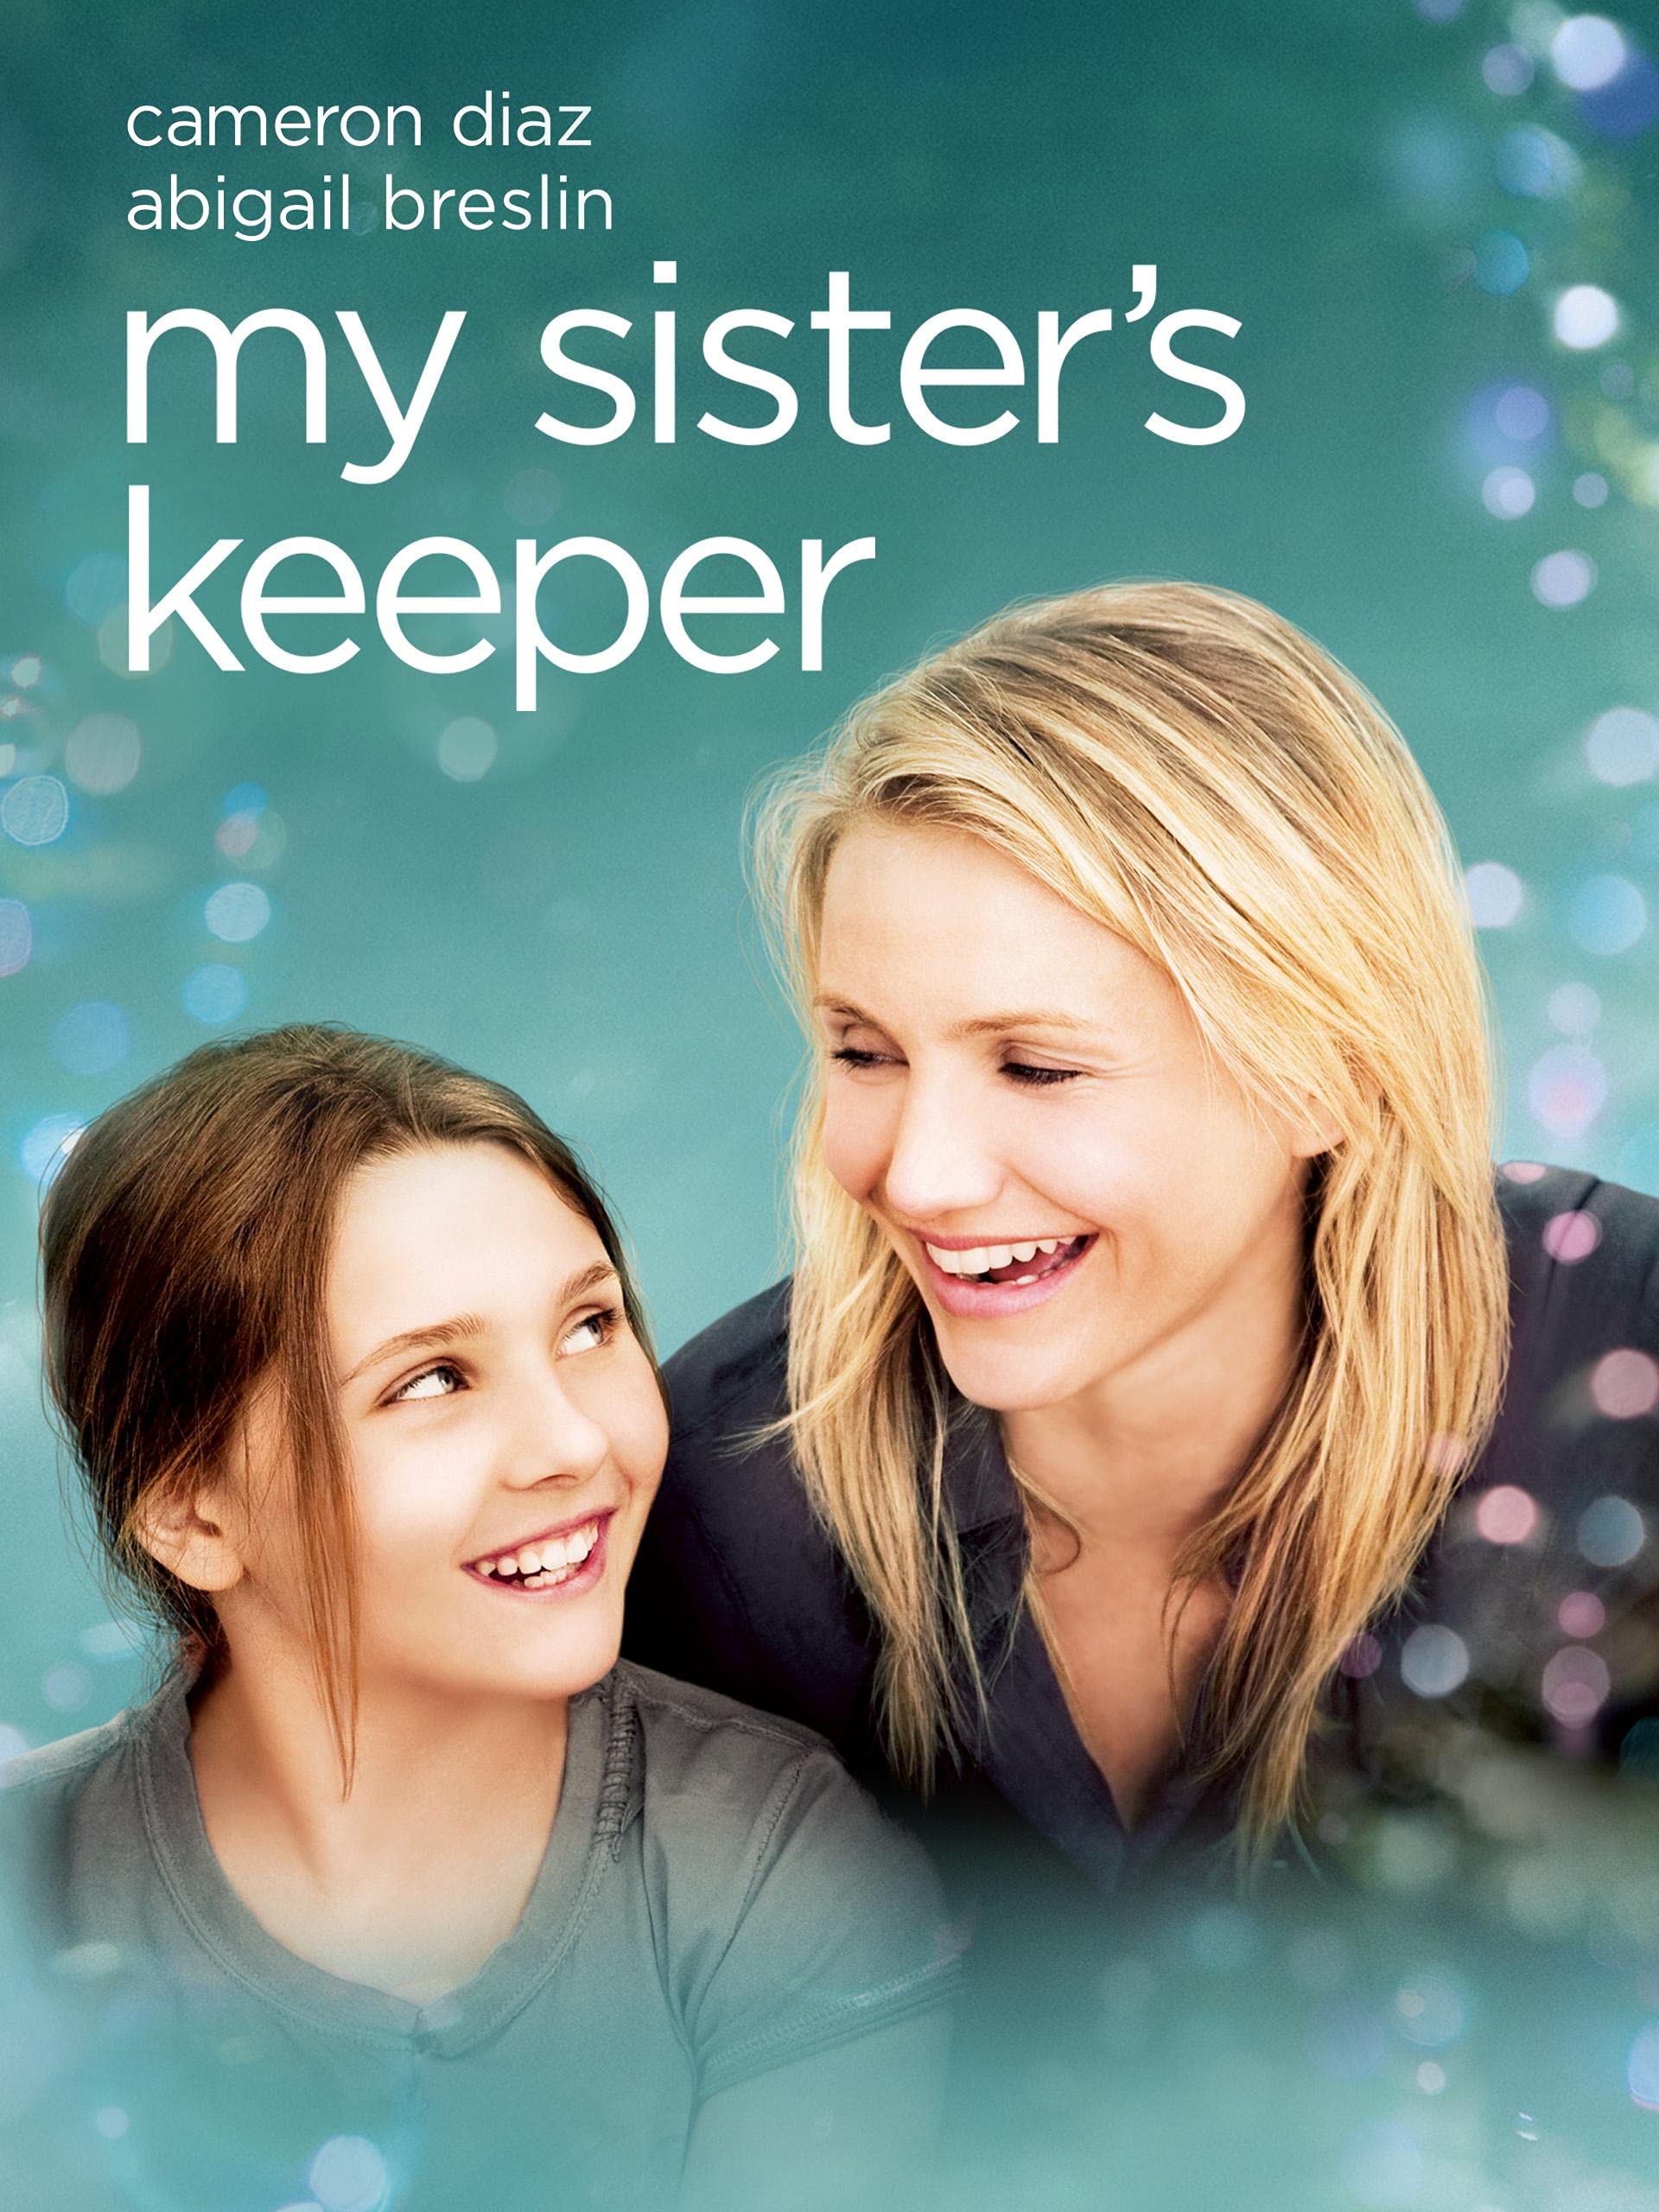 my sister's keeper meaning